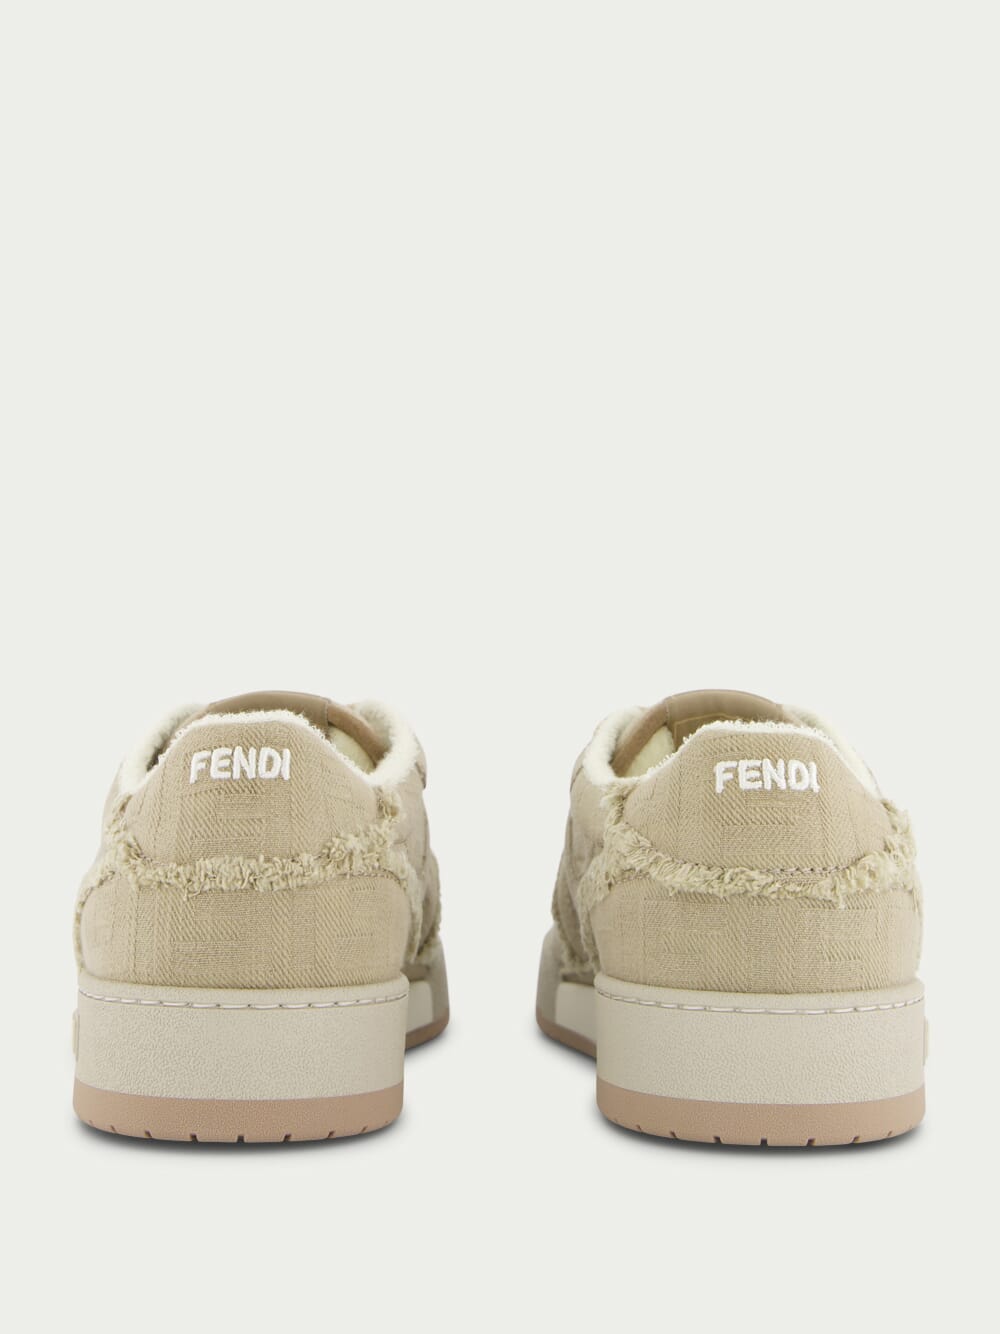 FendiMatch Lace-Up Sneakers at Fashion Clinic